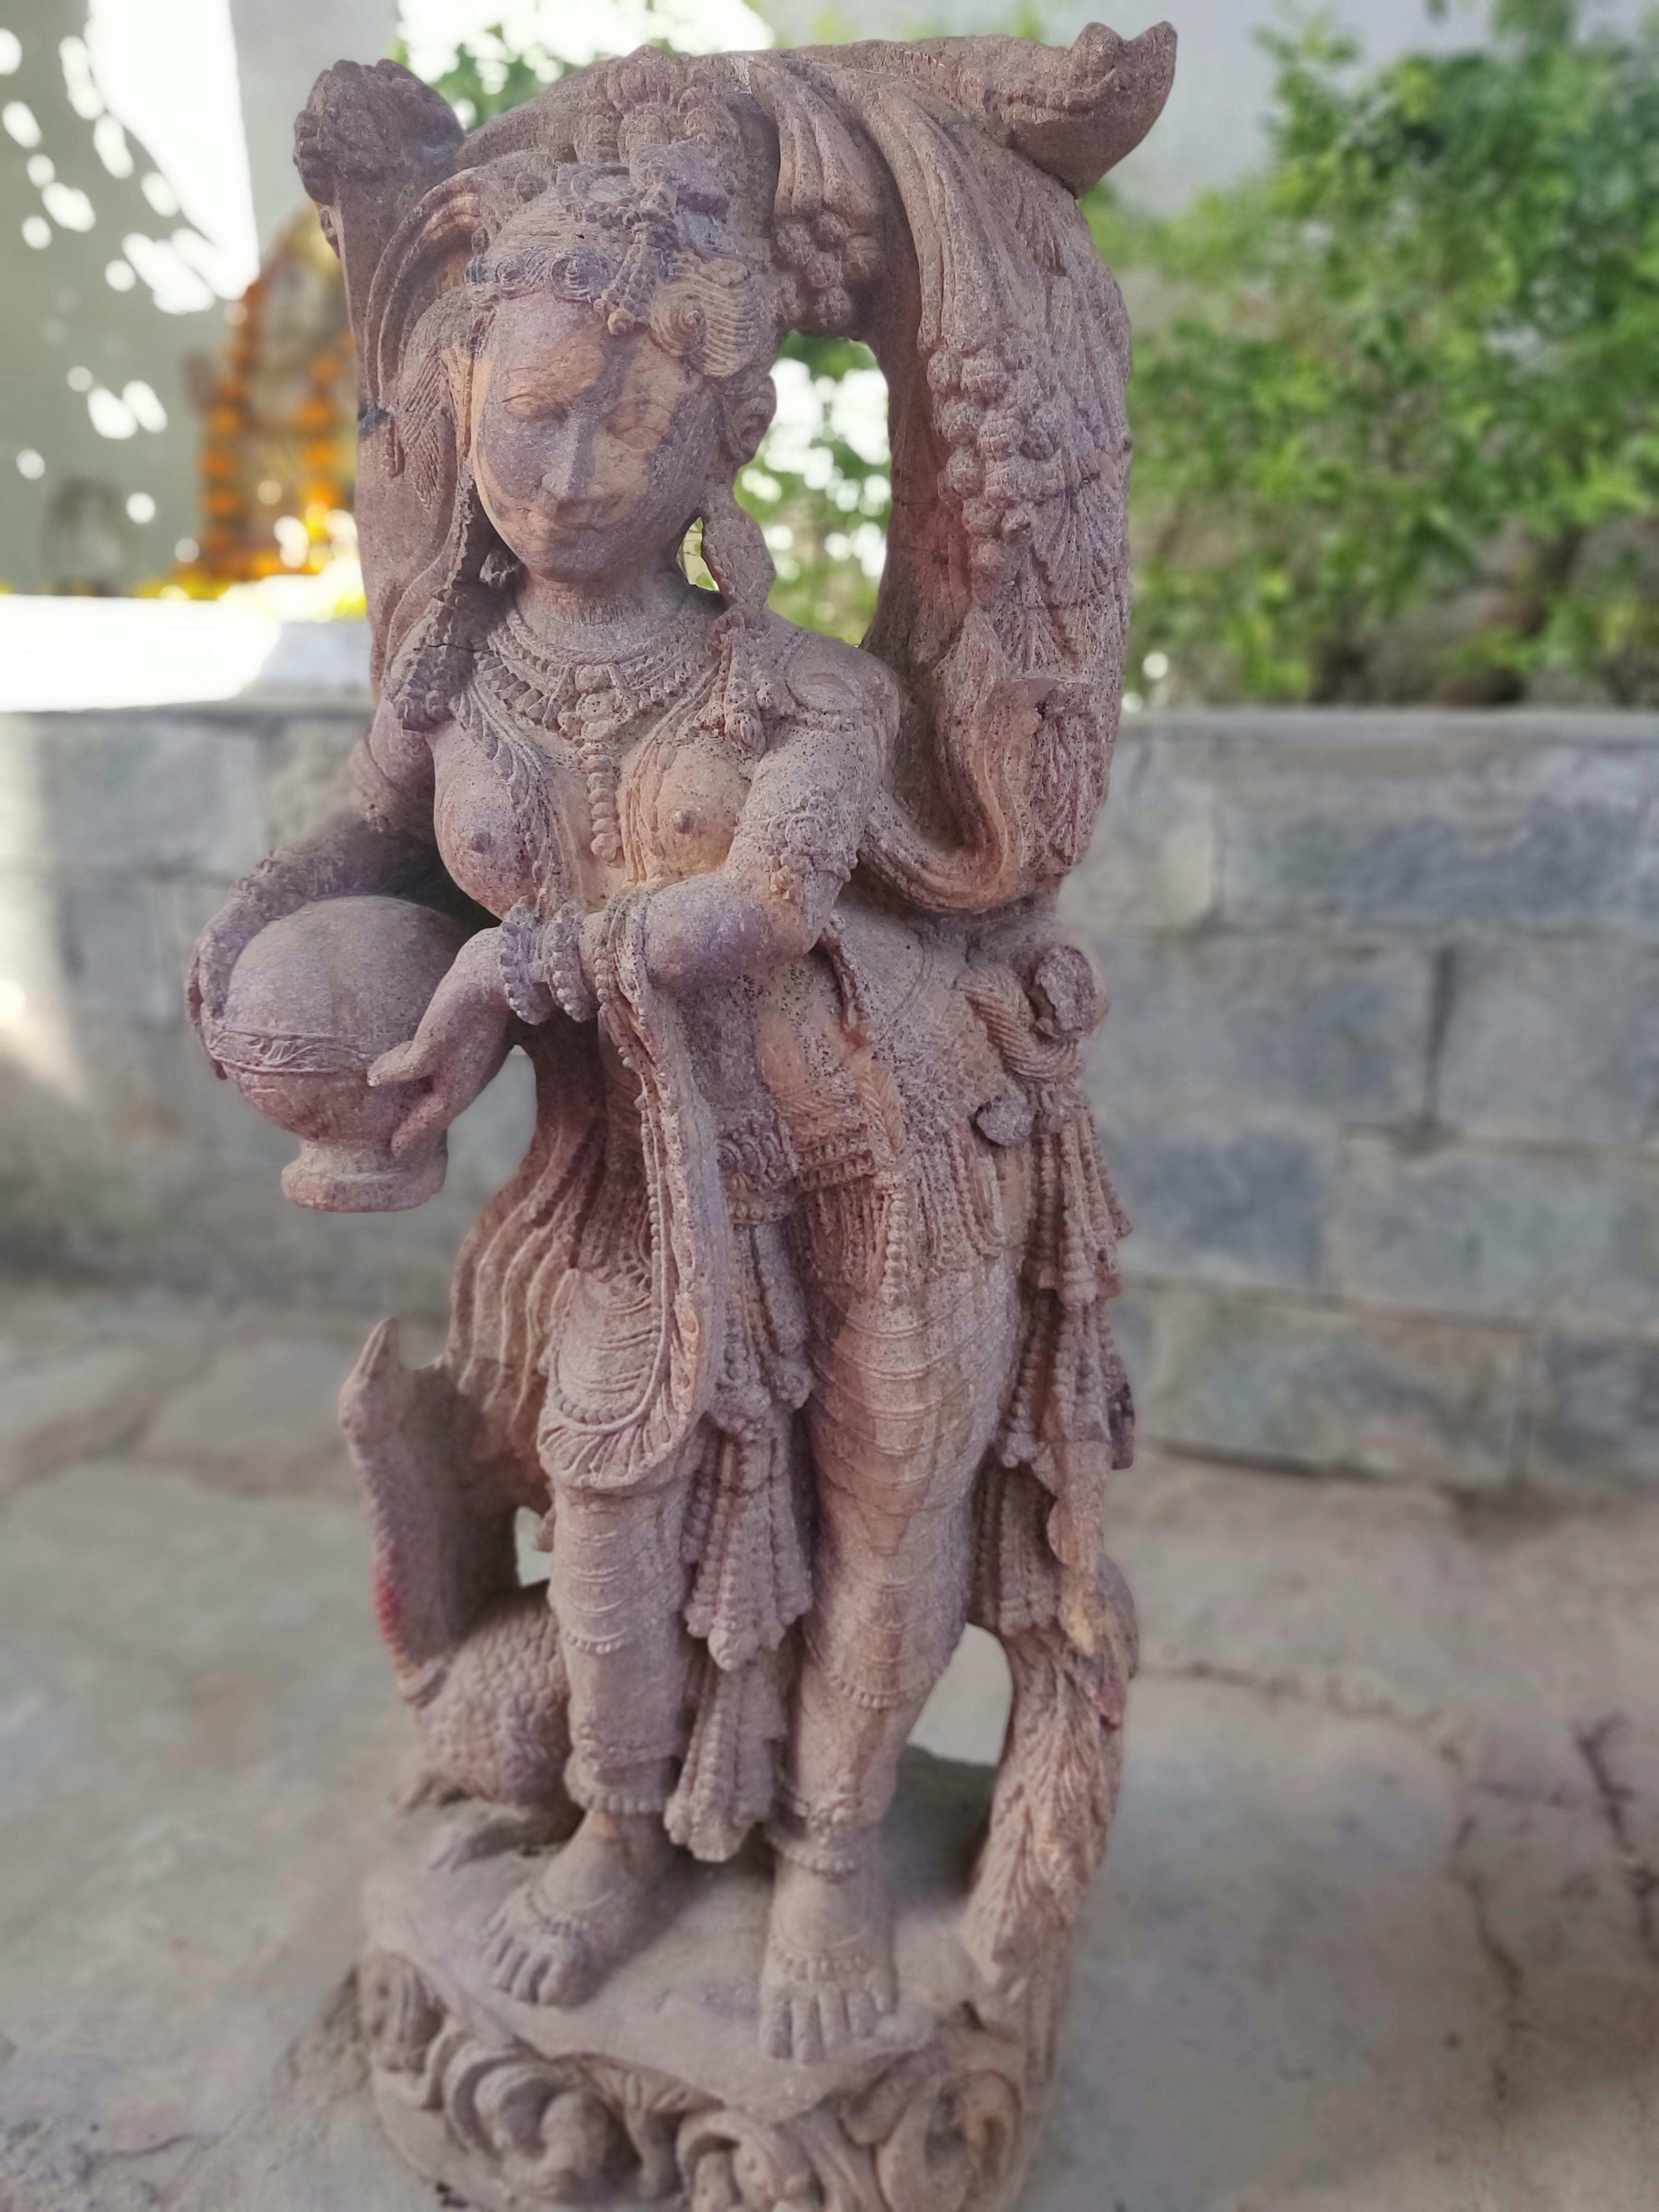 Free stock photo of artifacts, goddess, indian architectural statue